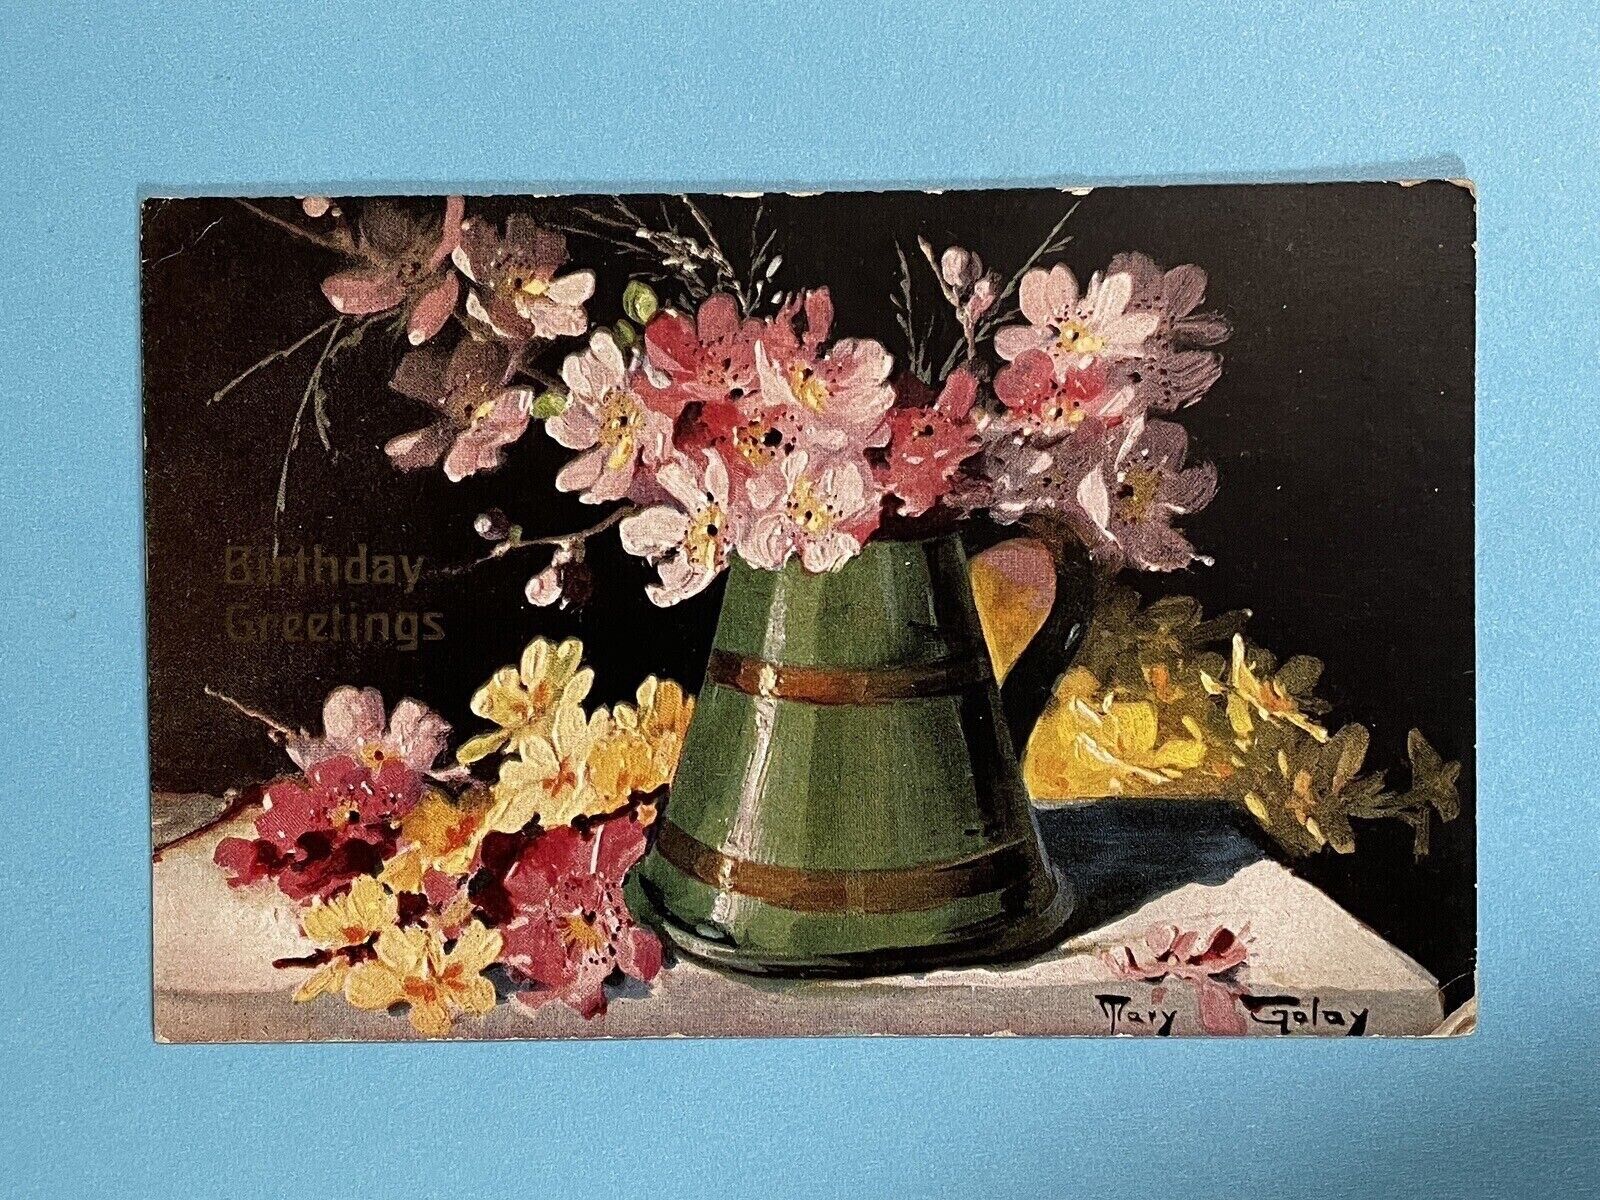 Vintage Artist Signed Mary Golay Floral Novelty Art Birthday Postcard Germany